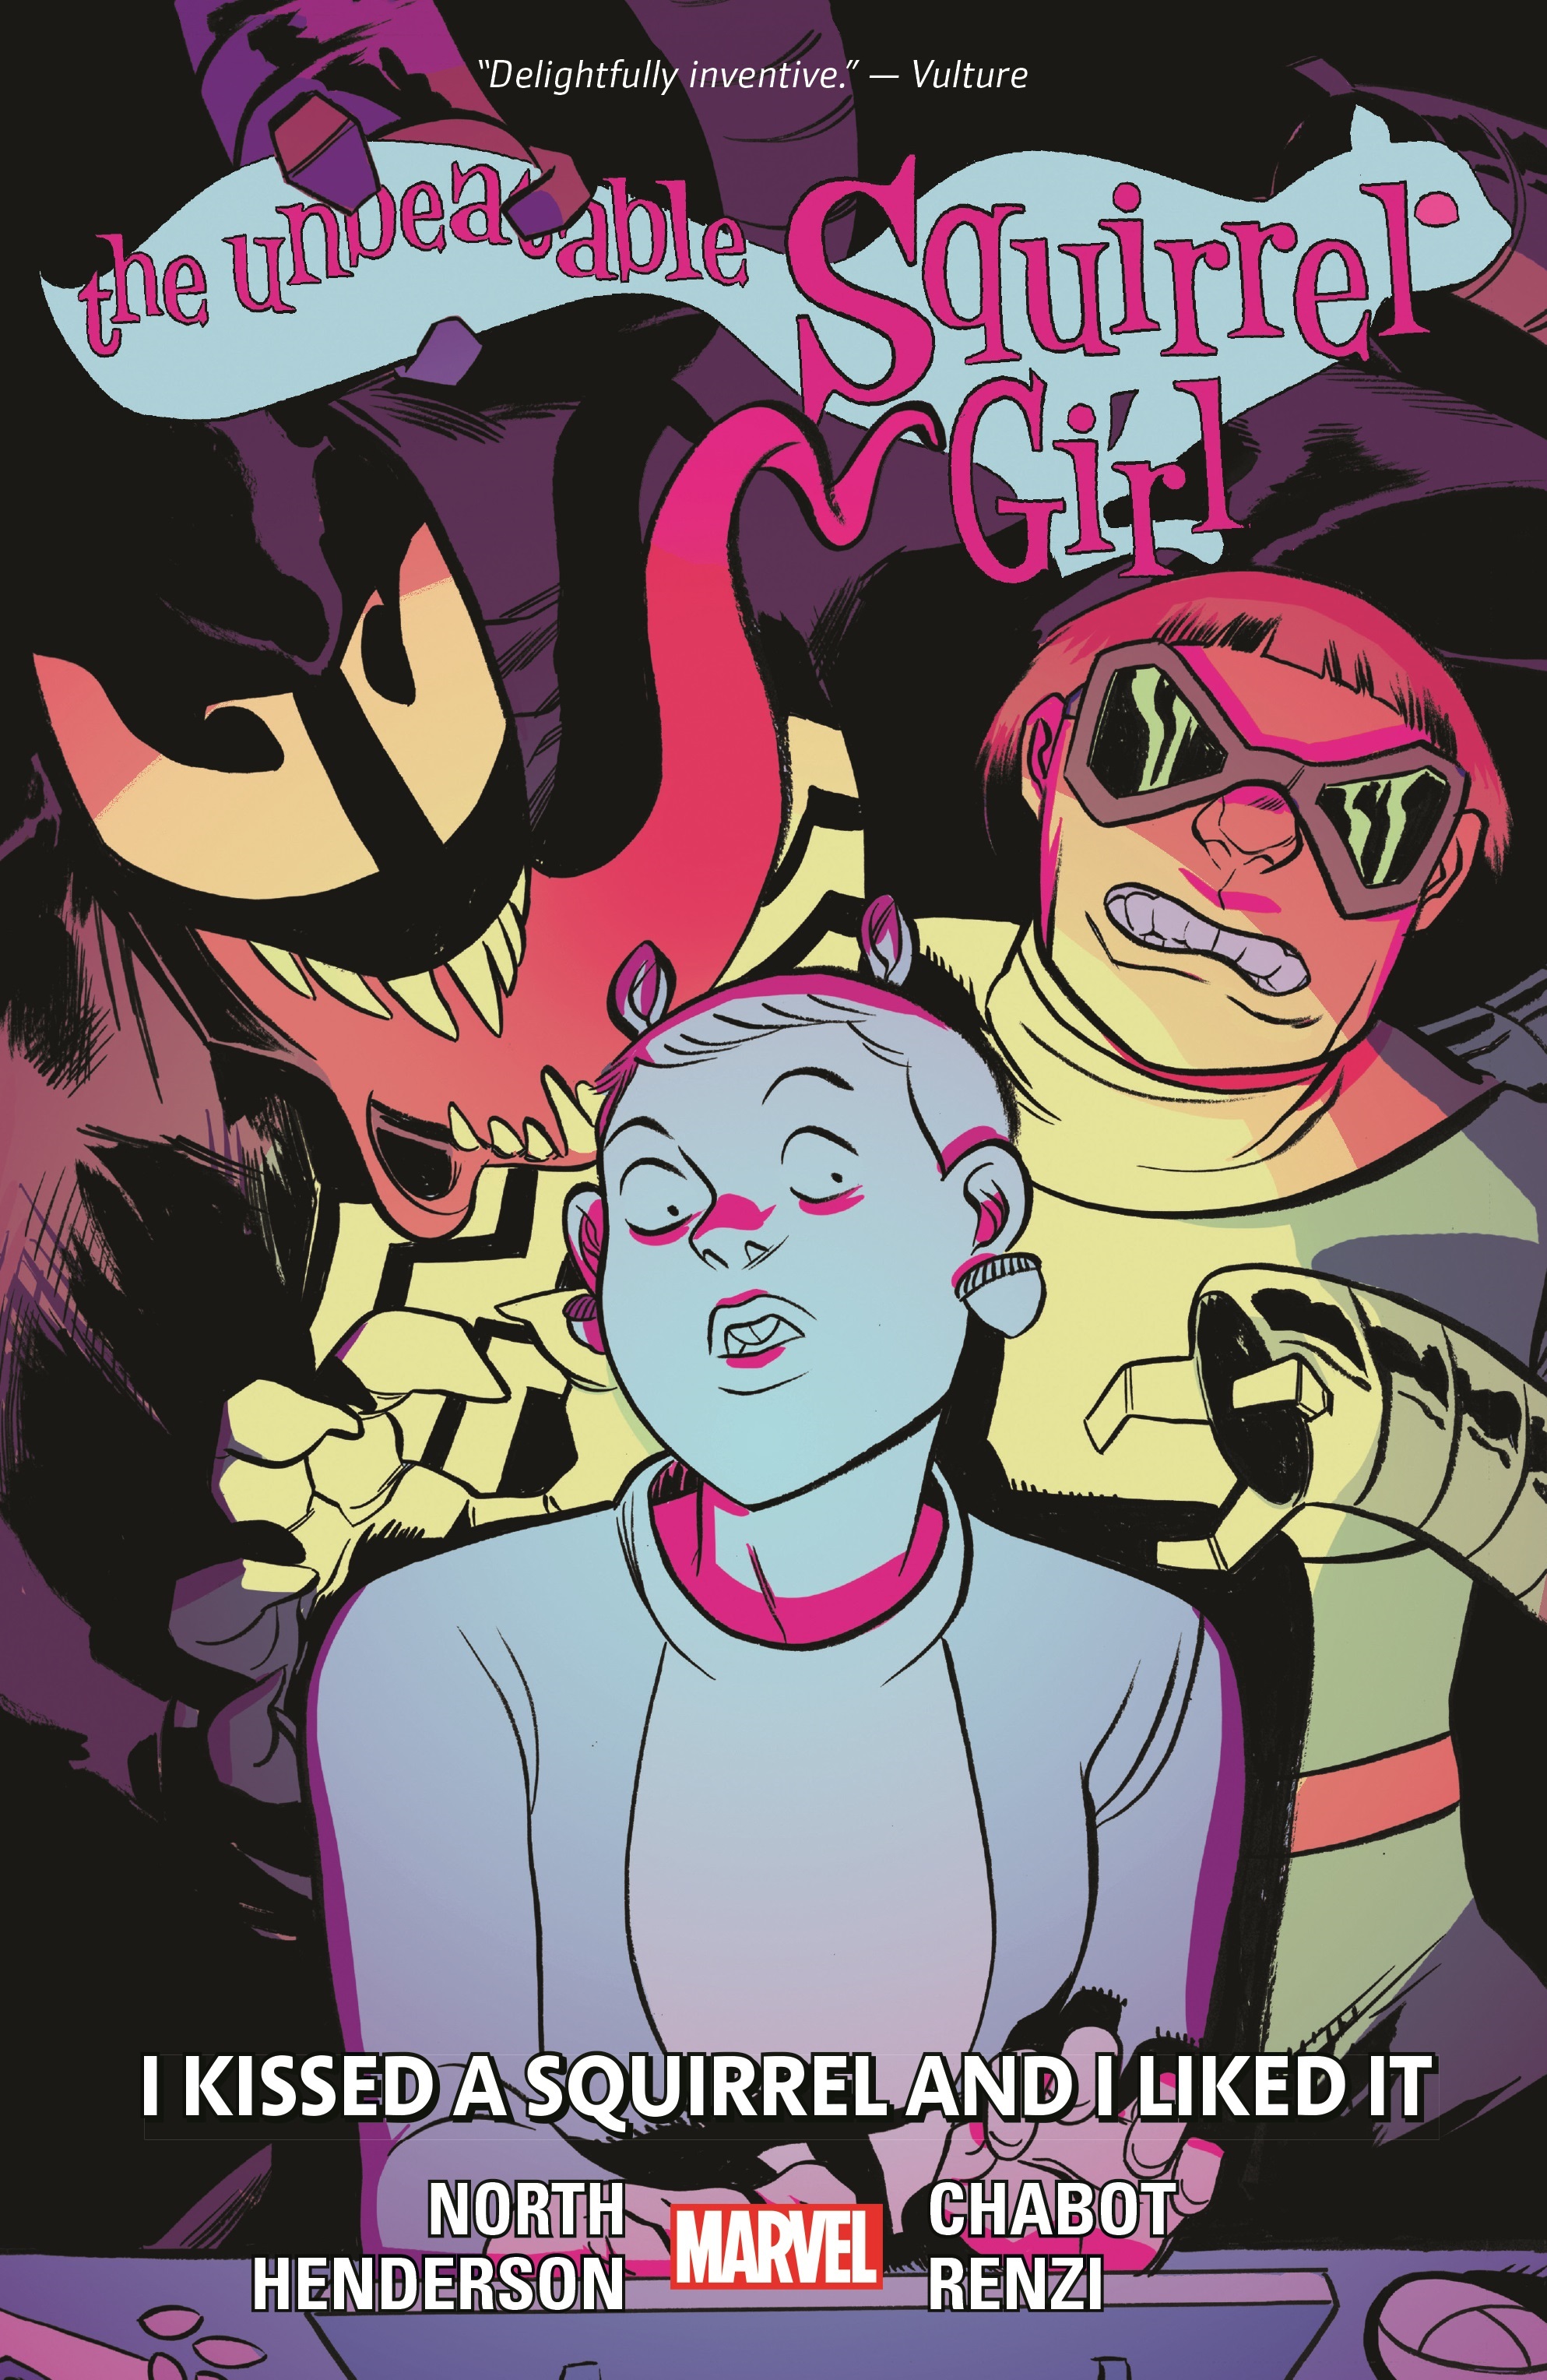 The Unbeatable Squirrel Girl Vol. 4: I Kissed A Squirrel And I Liked It (Trade Paperback)